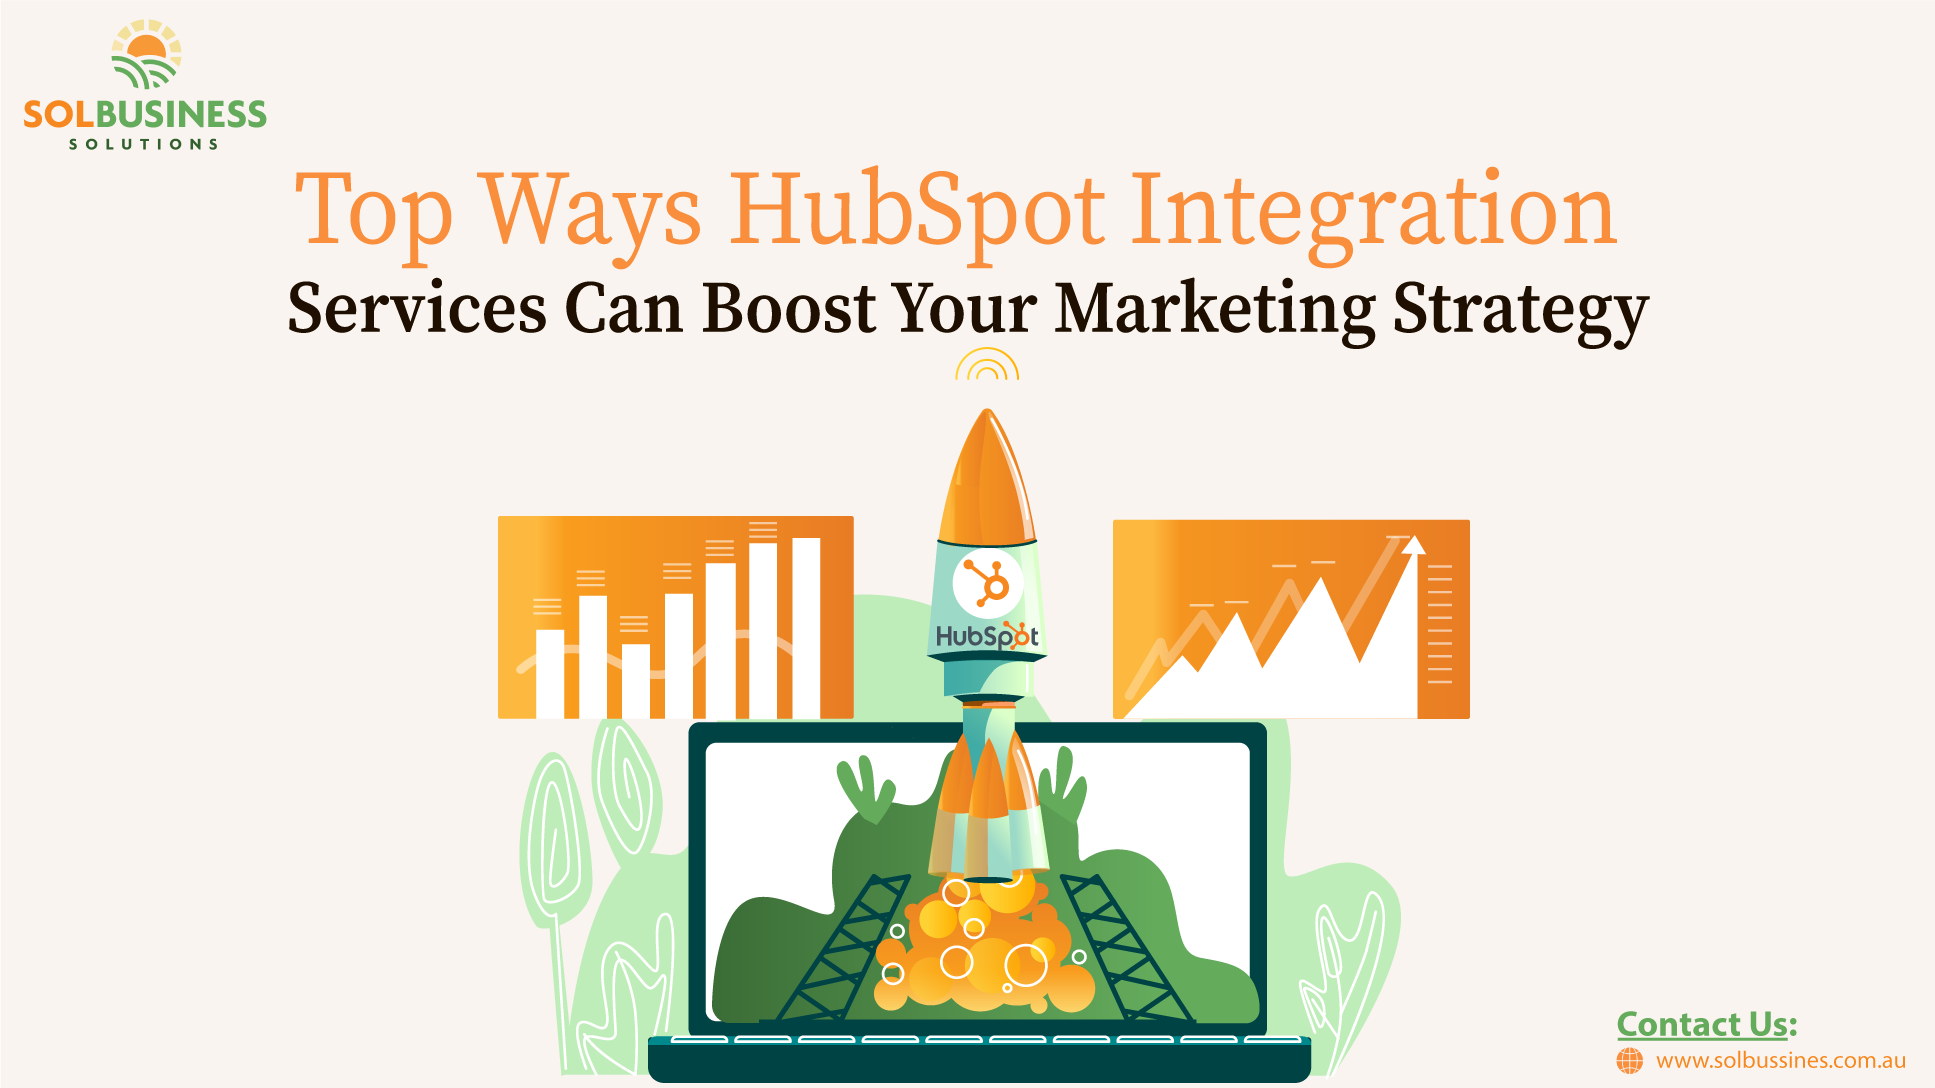 Top Ways HubSpot Integration Services Can Boost Your Marketing Strategy